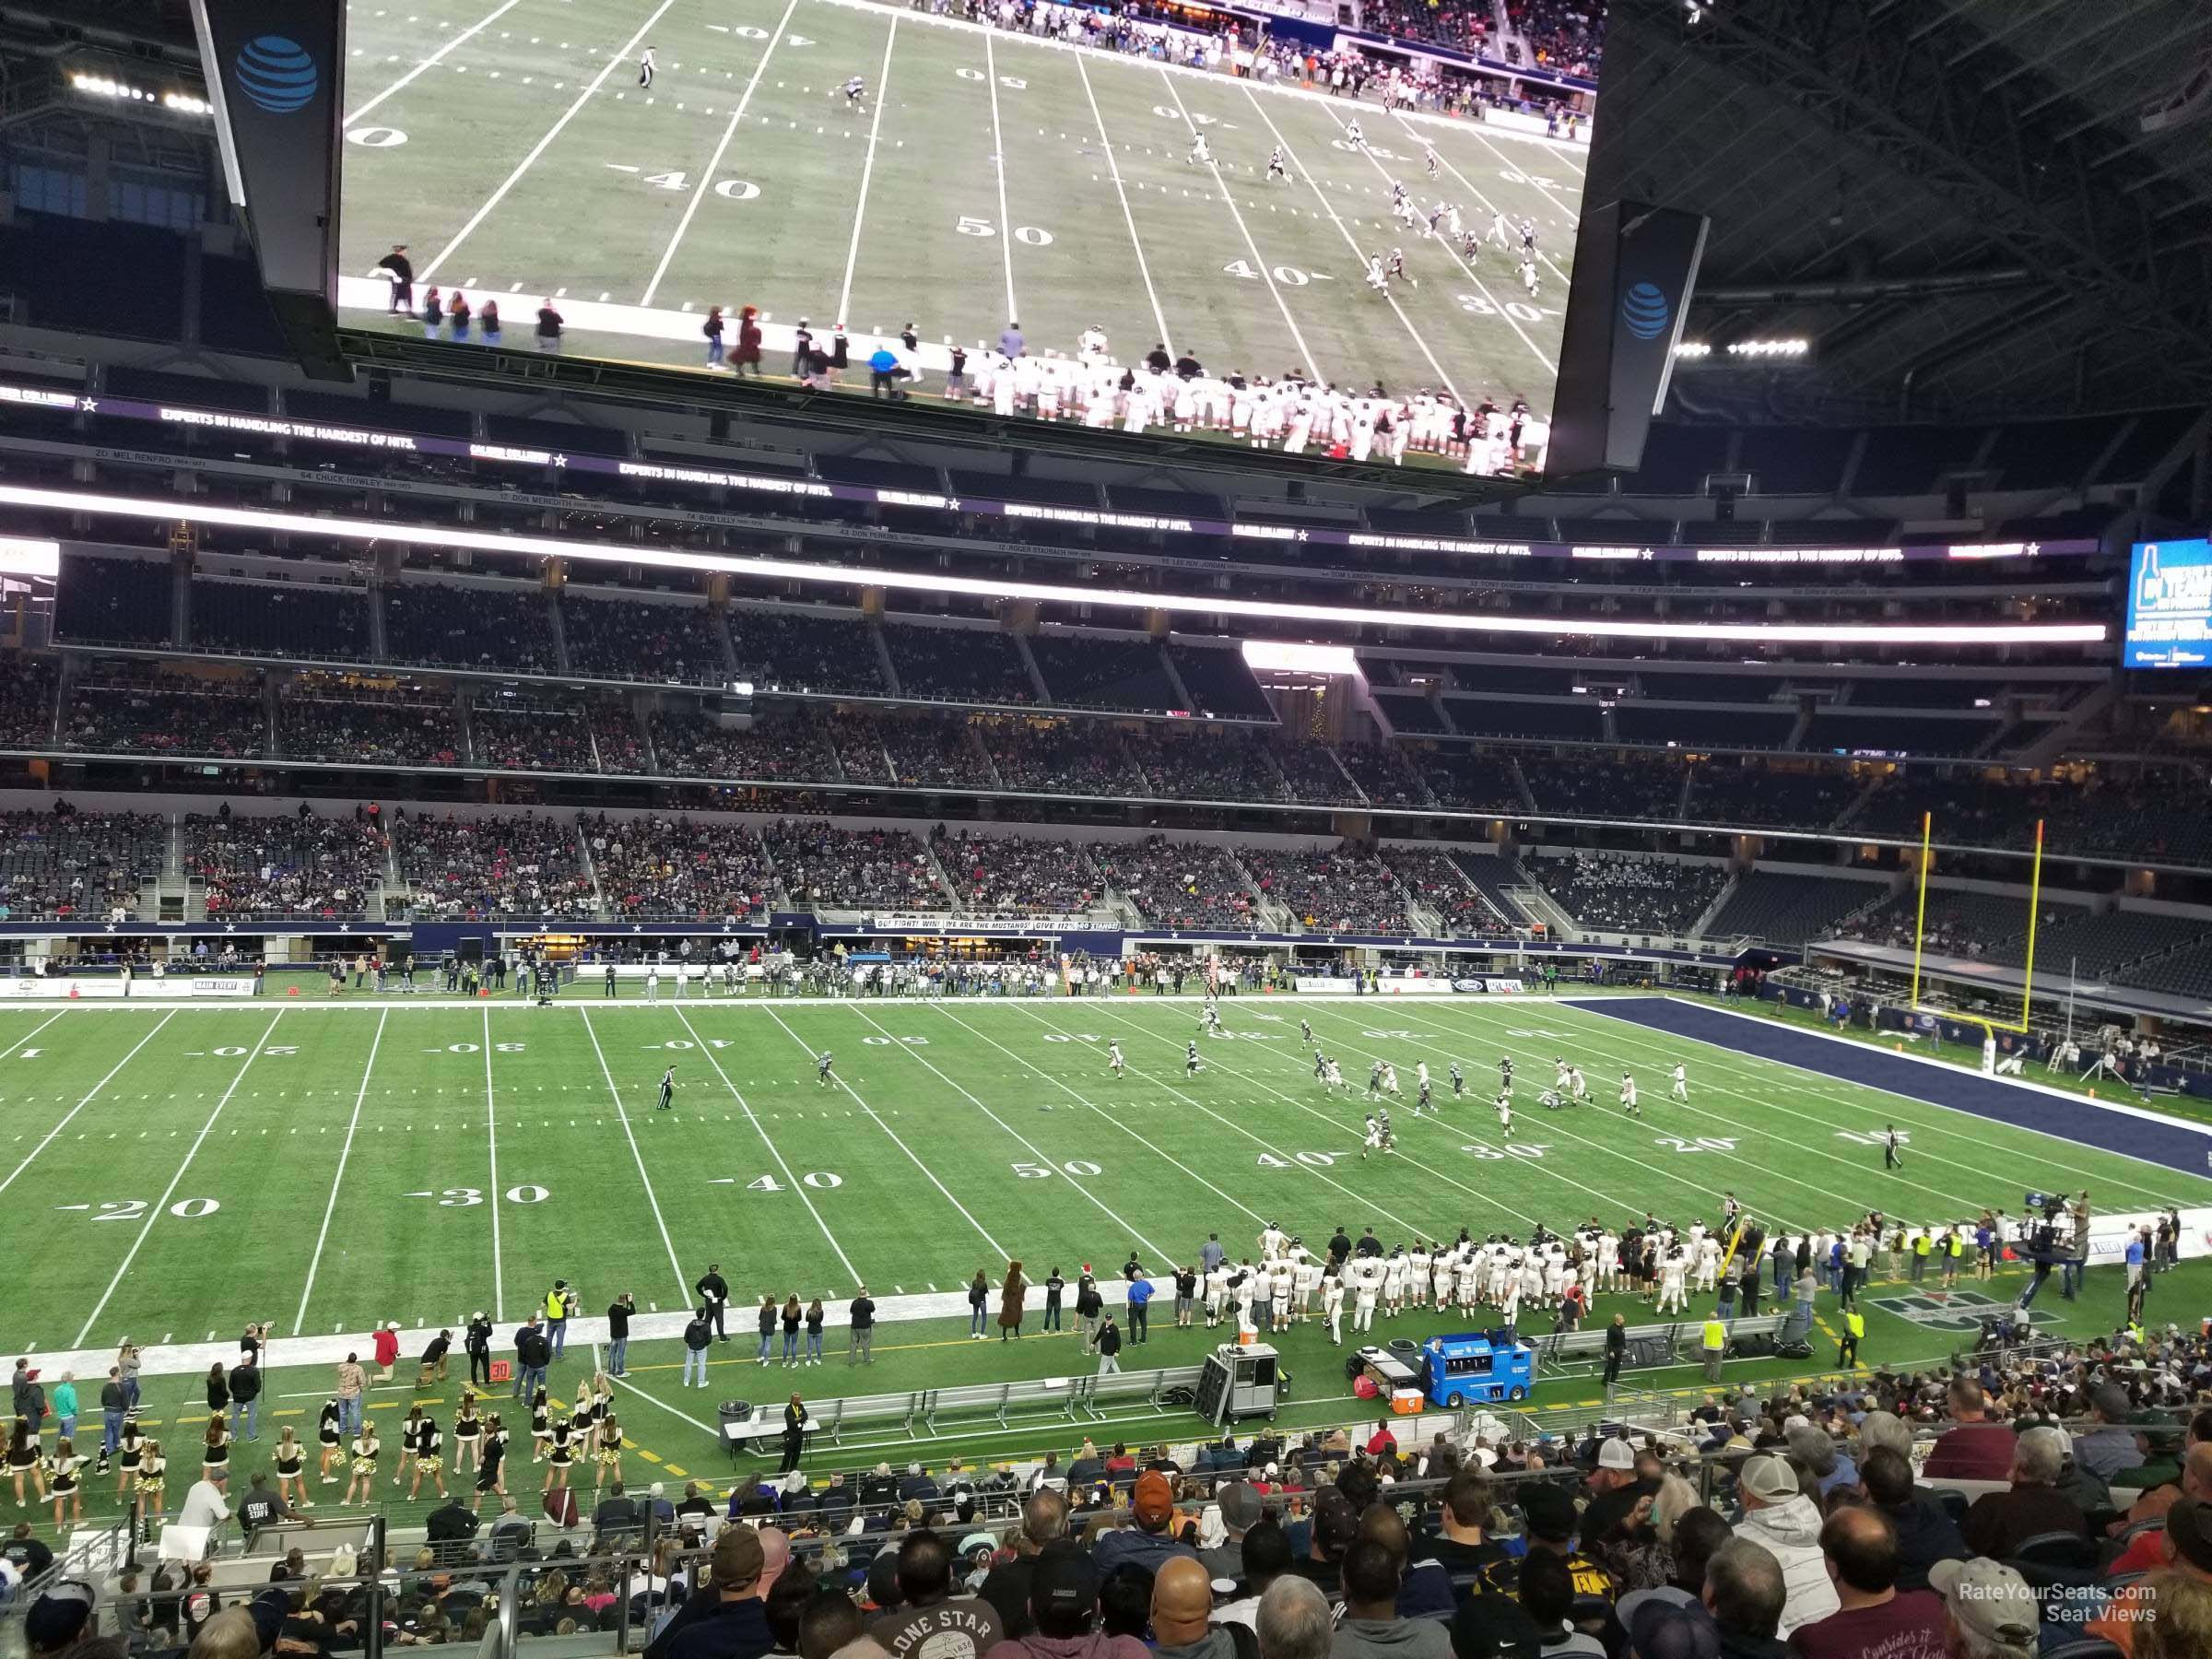 section c236, row 10 seat view  for football - at&t stadium (cowboys stadium)